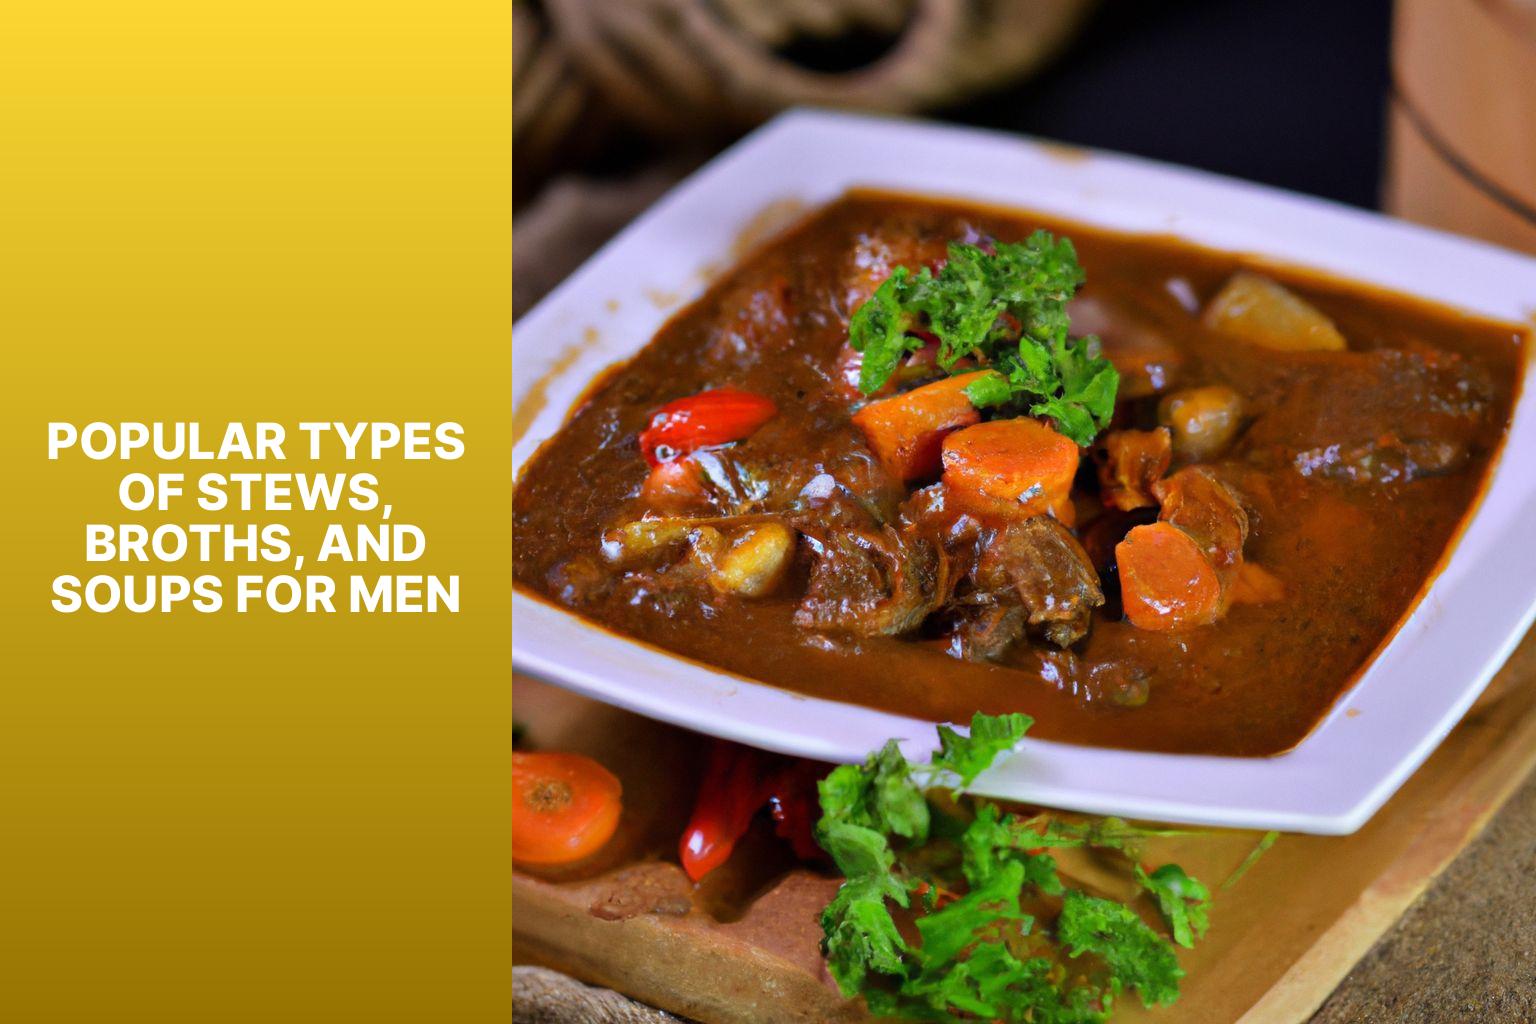 Popular Types of Stews, Broths, and Soups for Men - Stews, Broths, and Soups: Comfort Food for Men 